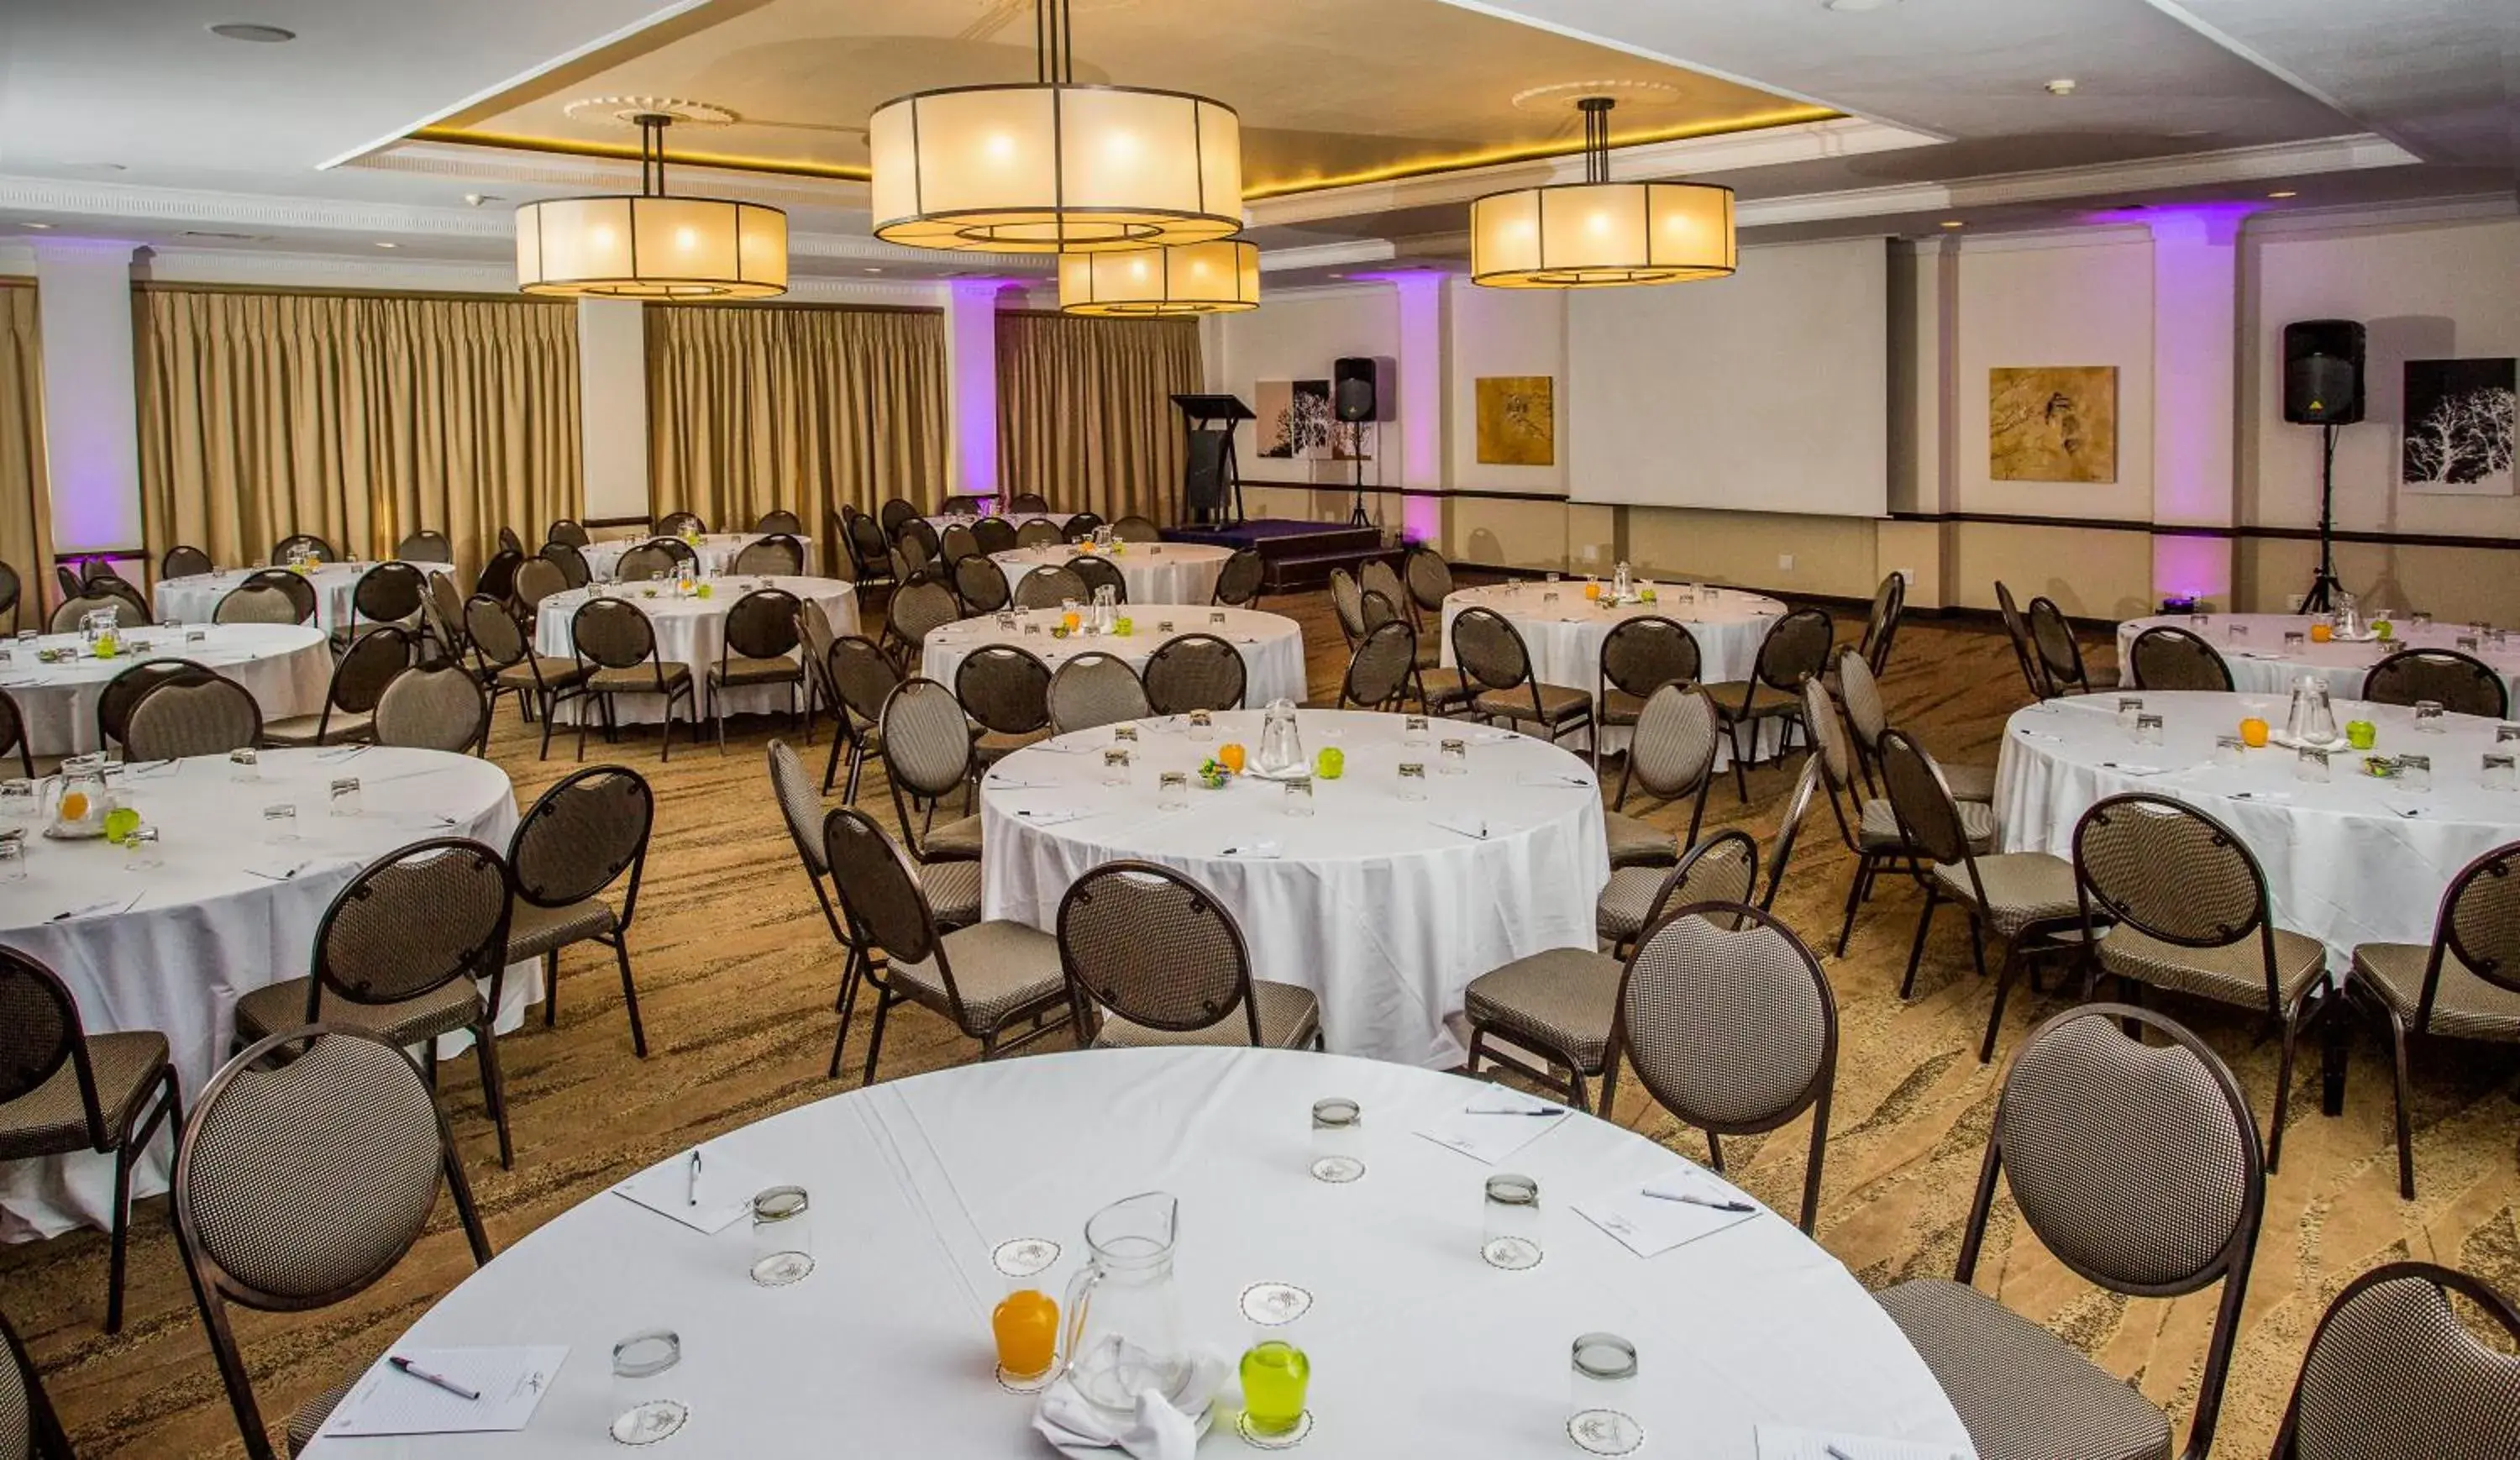 Meeting/conference room, Banquet Facilities in The Centurion Hotel